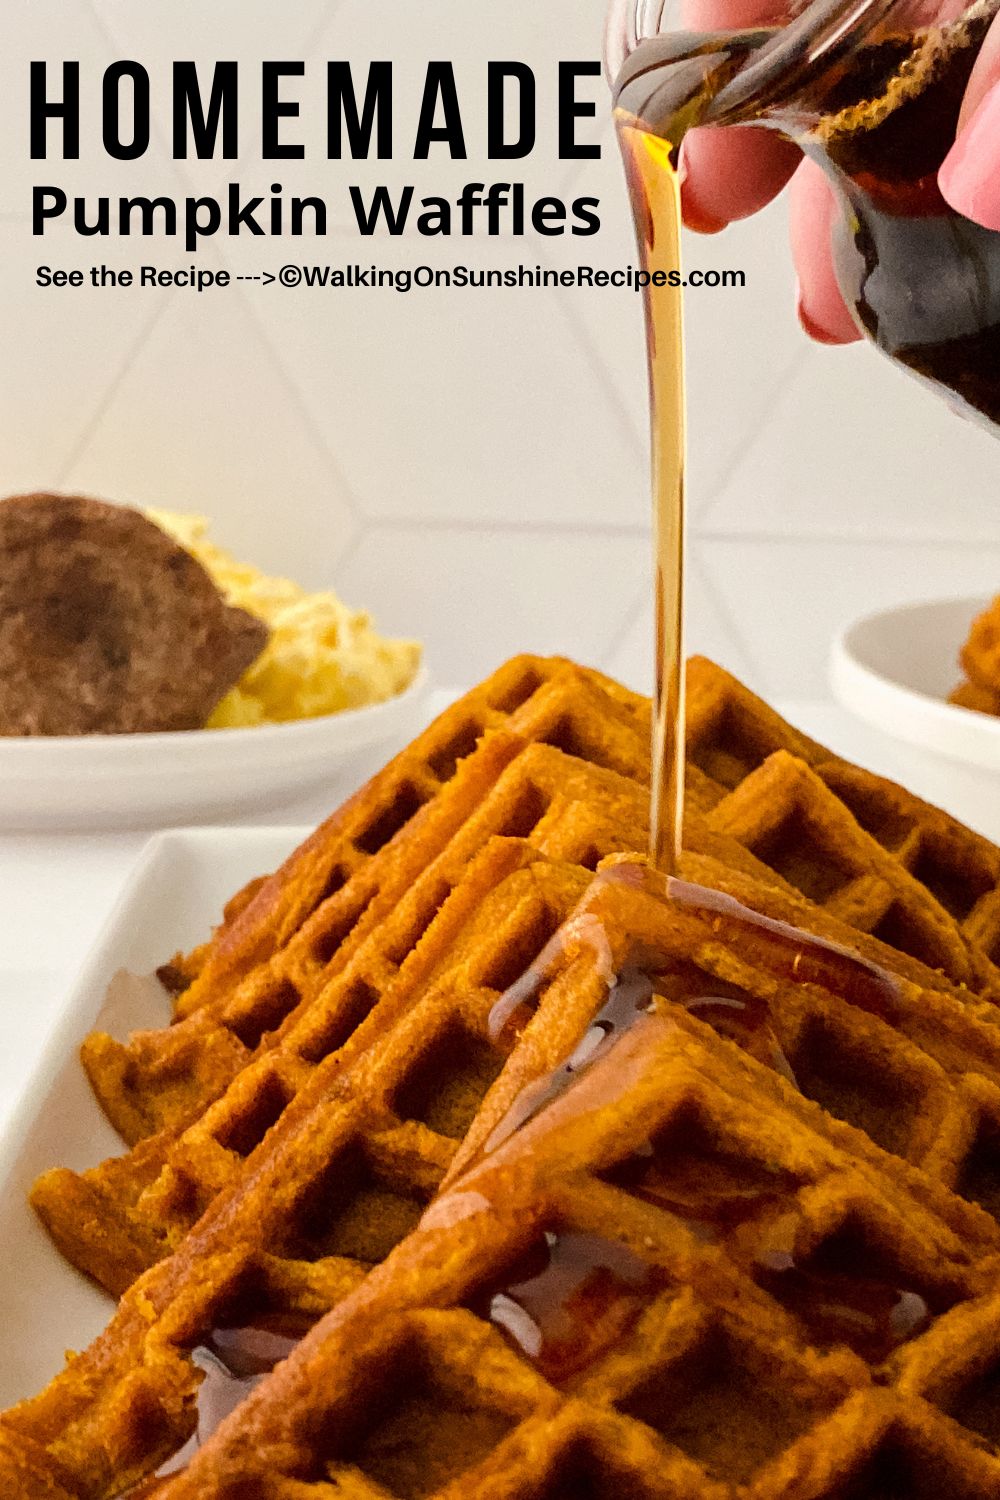 Syrup being poured onto a platter of homemade pumpkin waffles